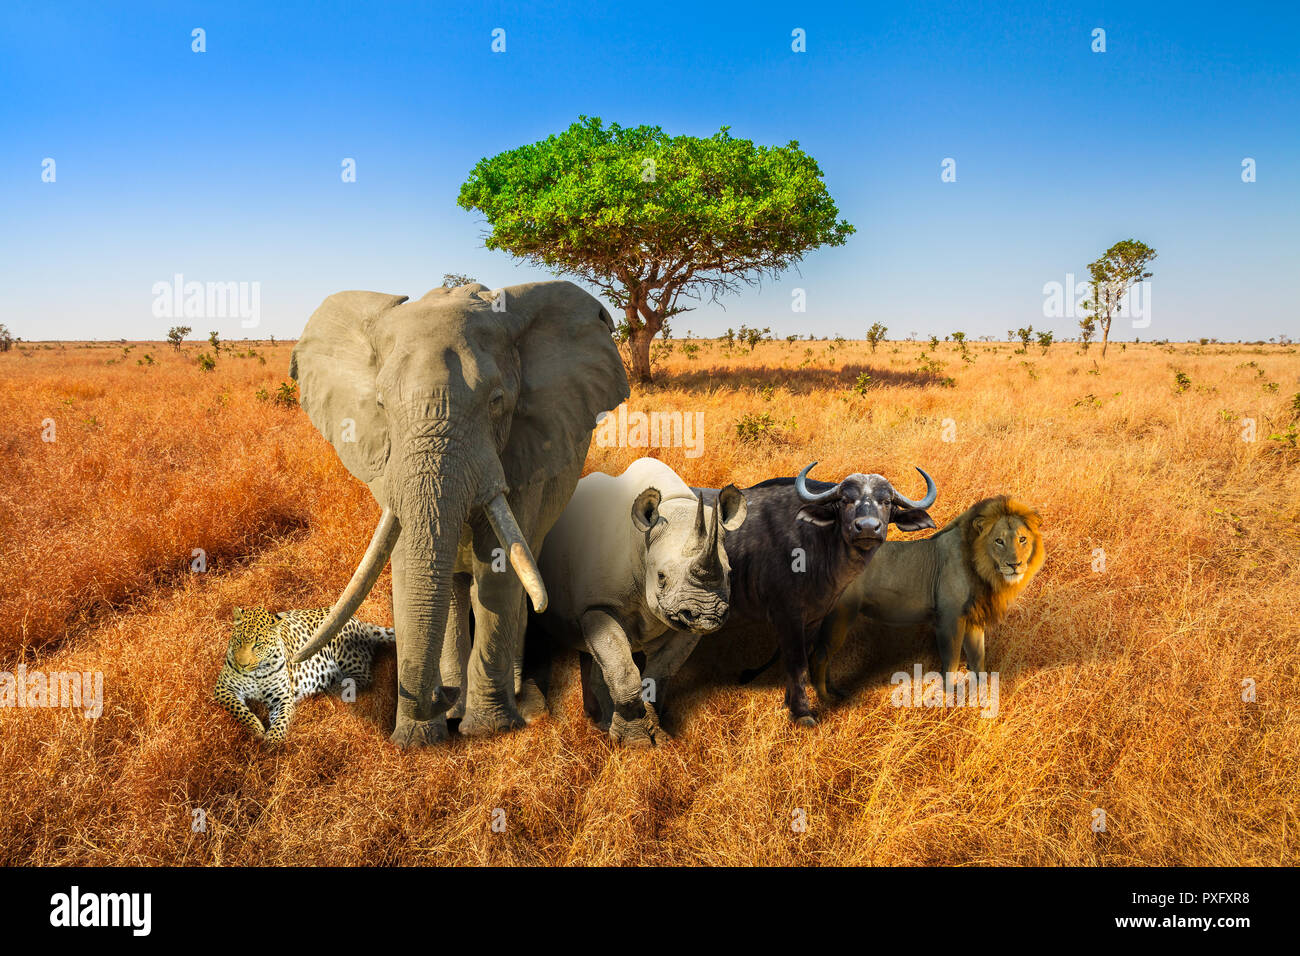 Africa safari scene with wild animals. African Big Five: Leopard, Elephant, Black Rhino, Buffalo and Lion in savannah landscape. Copy space with blue sky. Wildlife background. Stock Photo